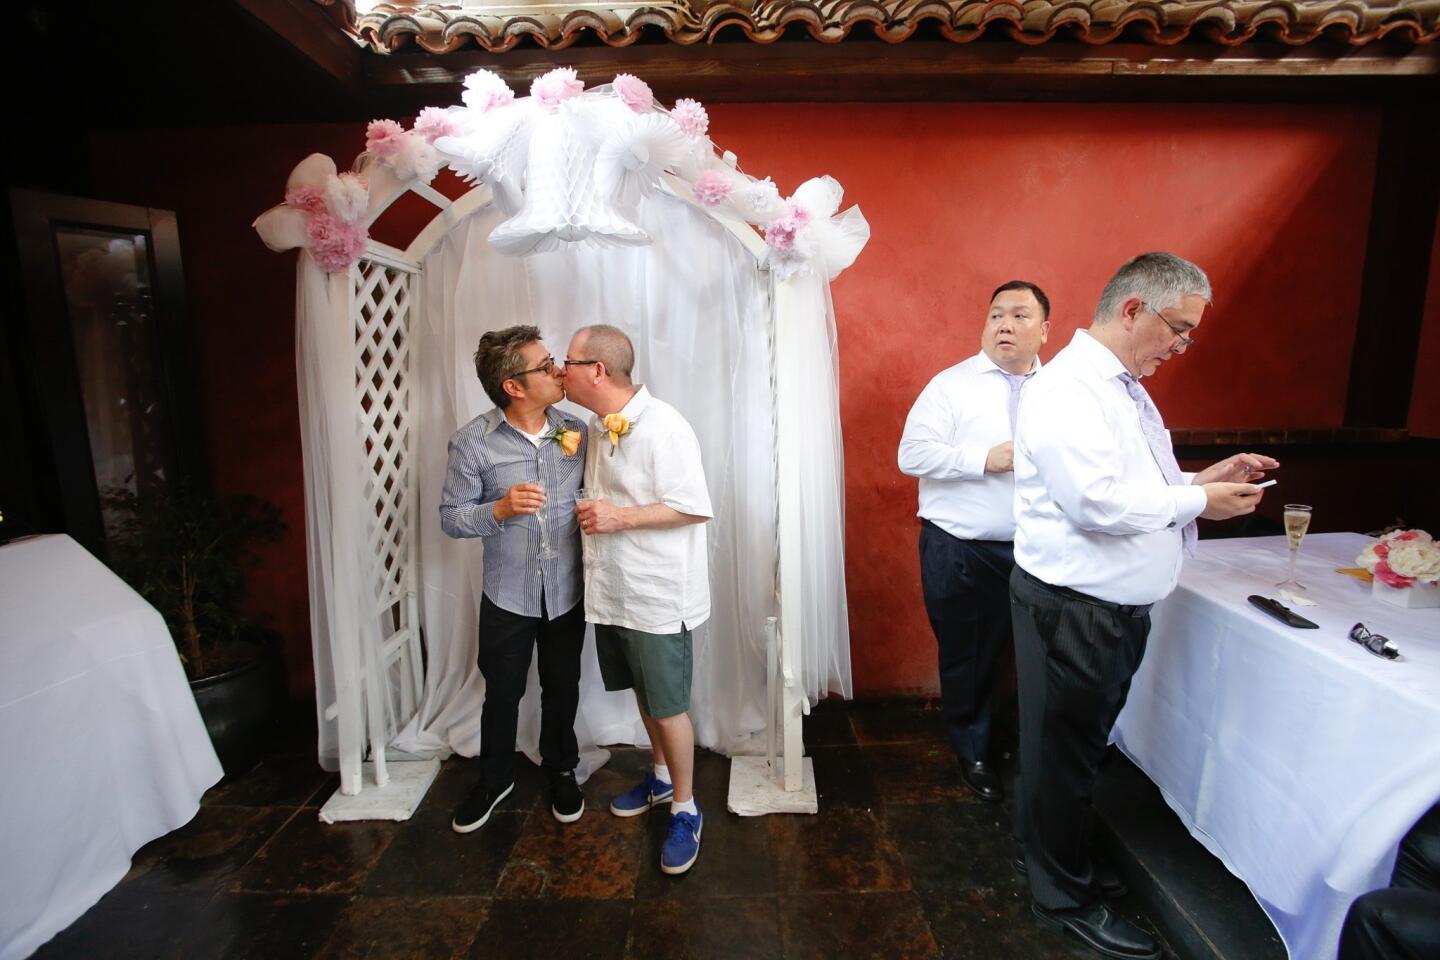 Jaime Ferrar, 54, left and Richard Sage, 52 of North Hollywood share a kiss inside The Abbey Food & Bar in West Hollywood, where a reception was being held for them and all the other gay couples who got married in the nearby auto court outside the West Hollywood City Council Chambers. They have been together for 31 years.